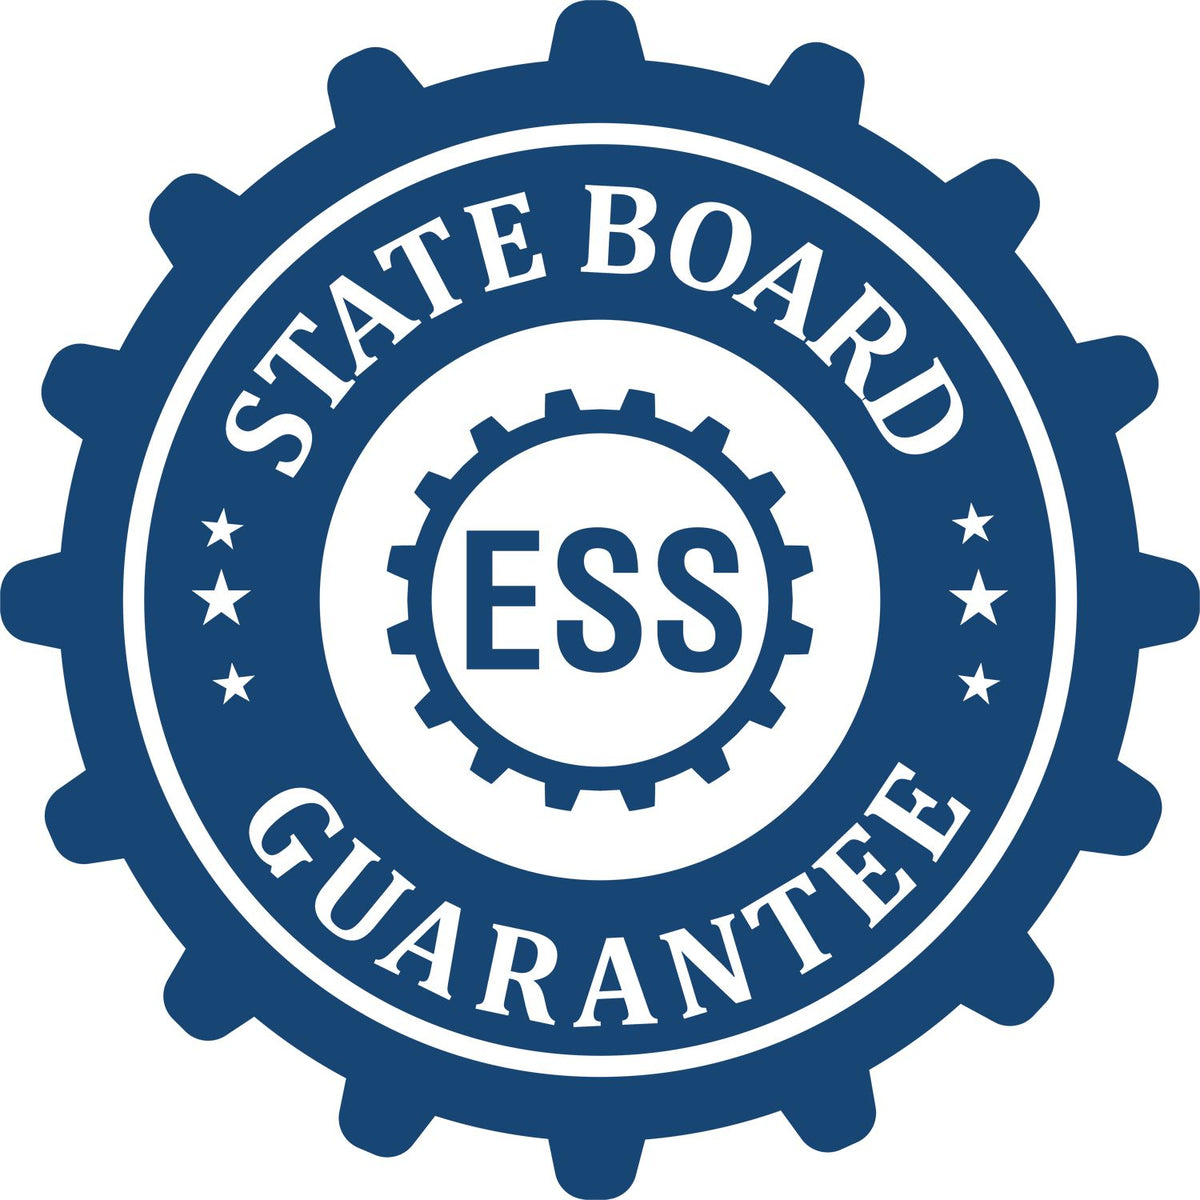 An emblem in a gear shape illustrating a state board guarantee for the Extended Long Reach Florida Surveyor Embosser product.